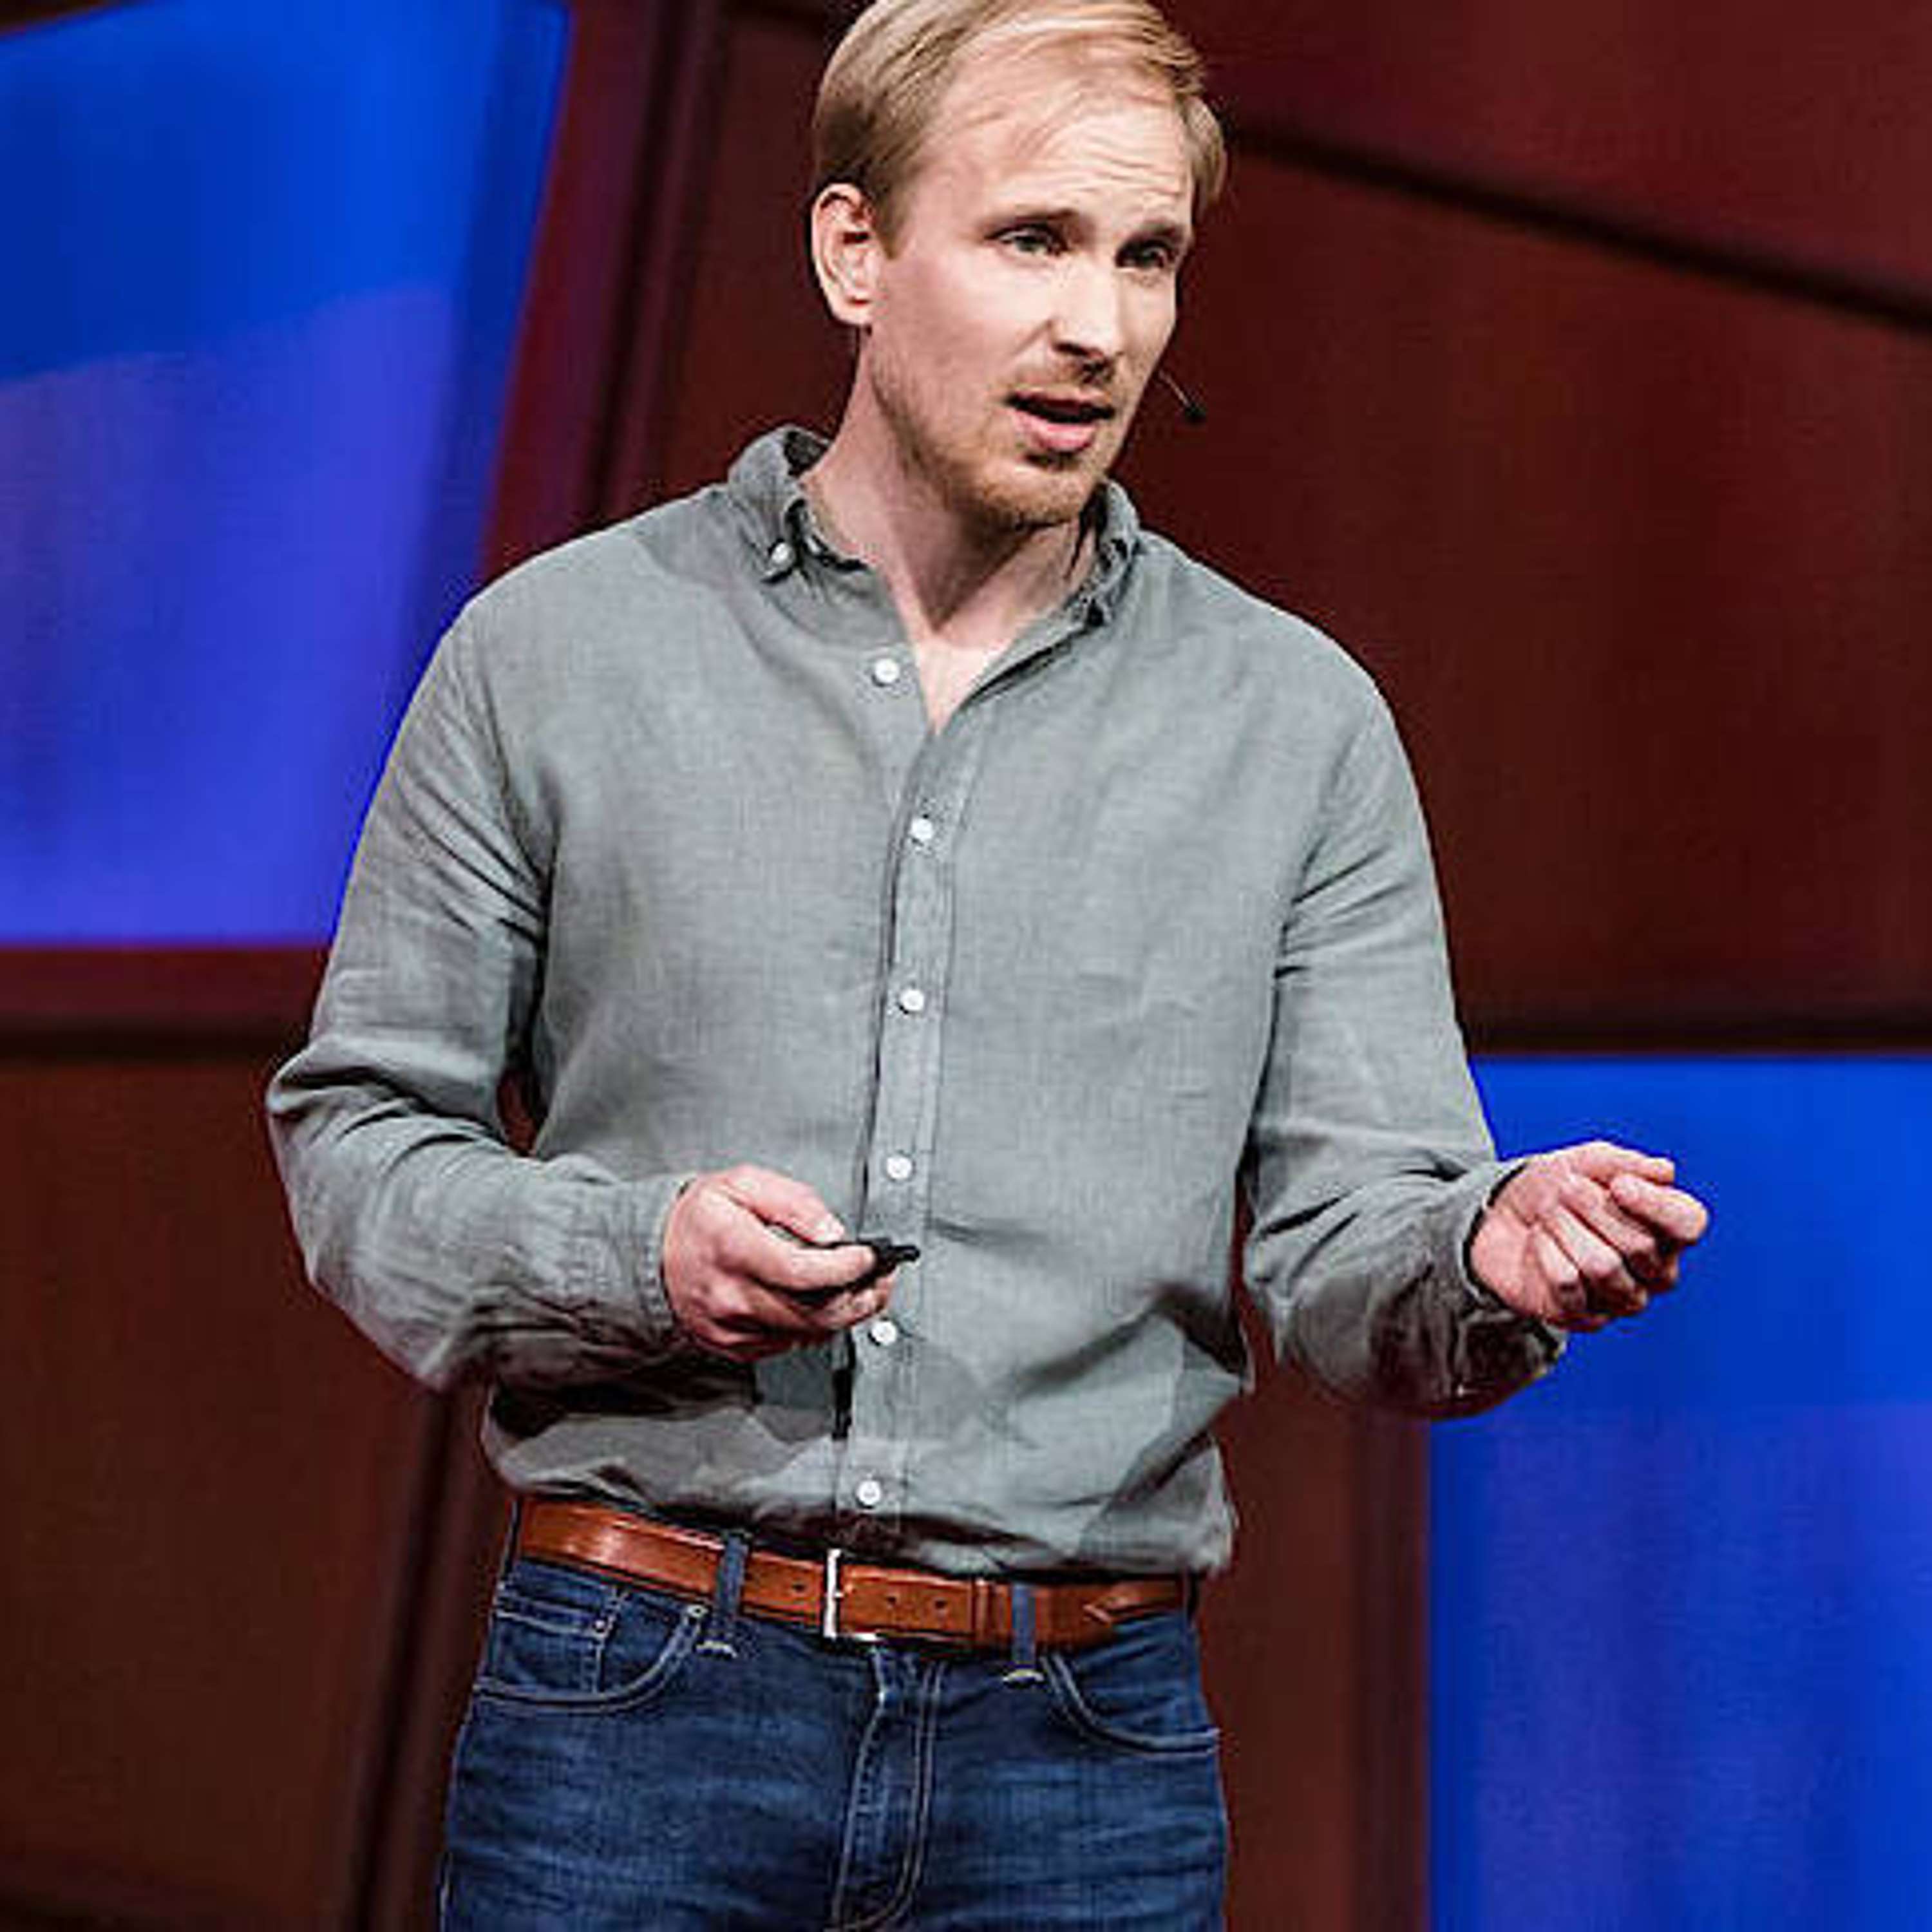 Episode 98: Interview with author Rutger Bregman, author of Humankind